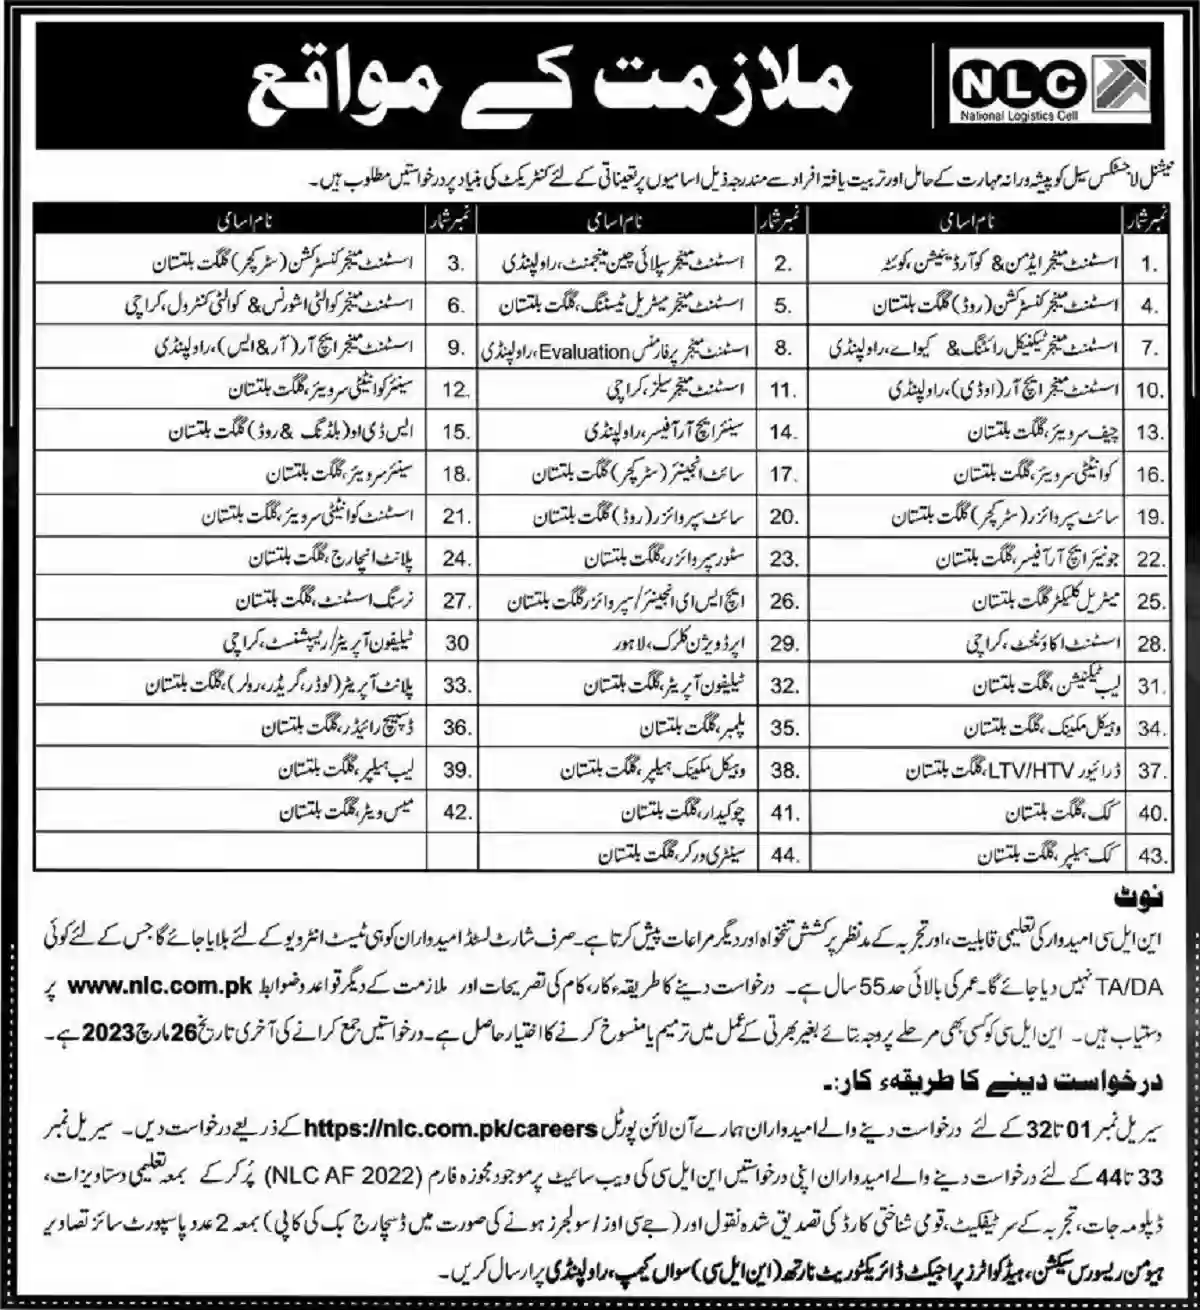 National Logistics Cell (NLC) Jobs 2023 Apply Online at nlc.com.pk/Careers